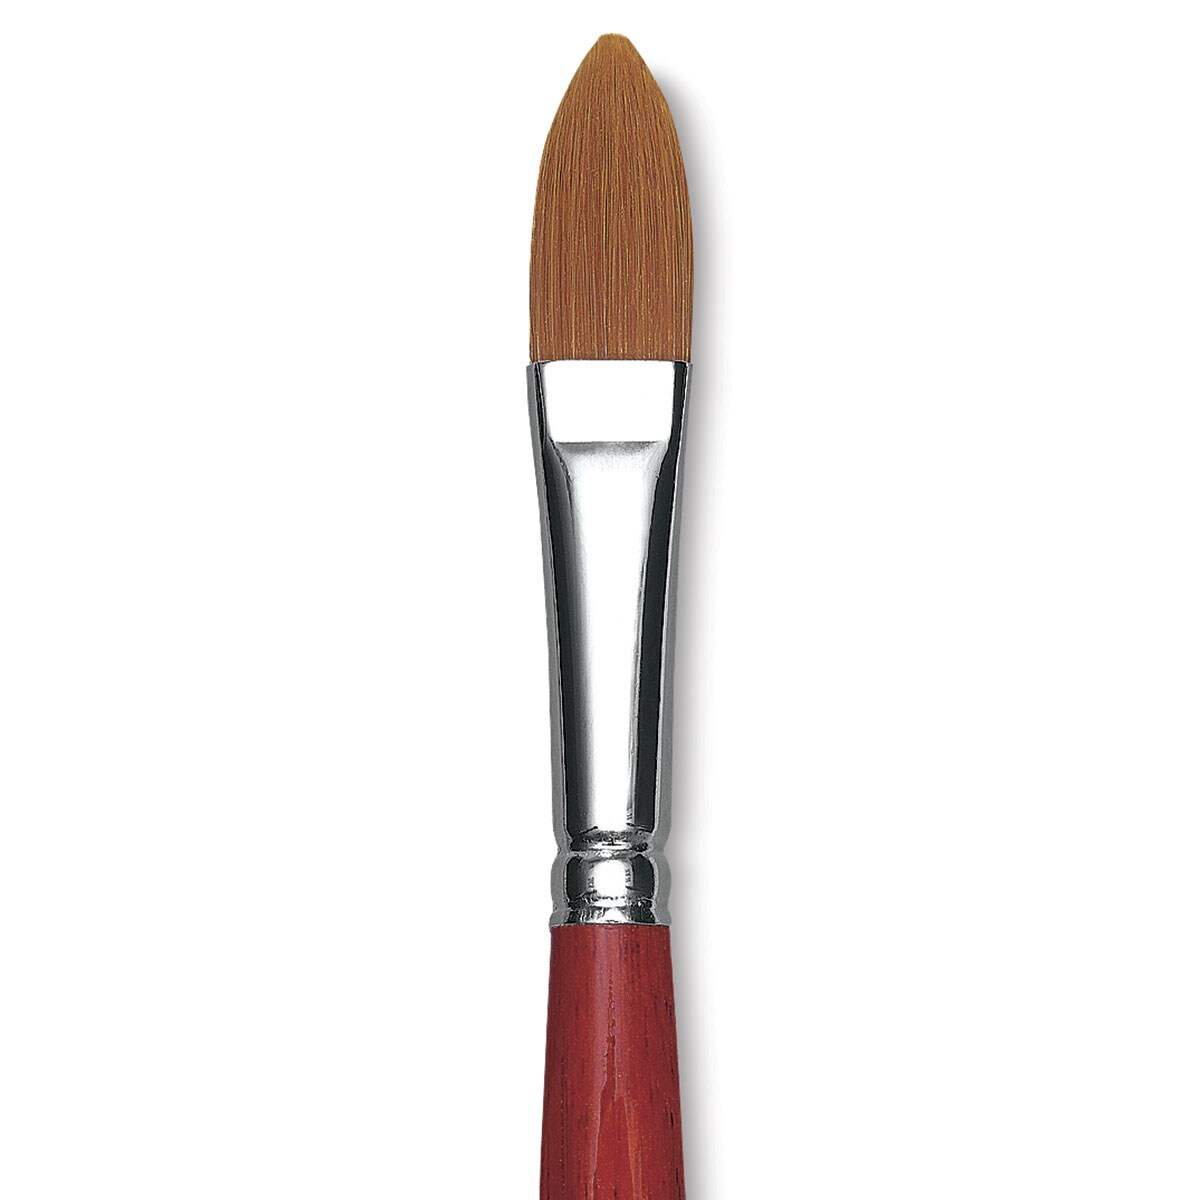 Da Vinci Cosmotop Spin Brushes and Sets